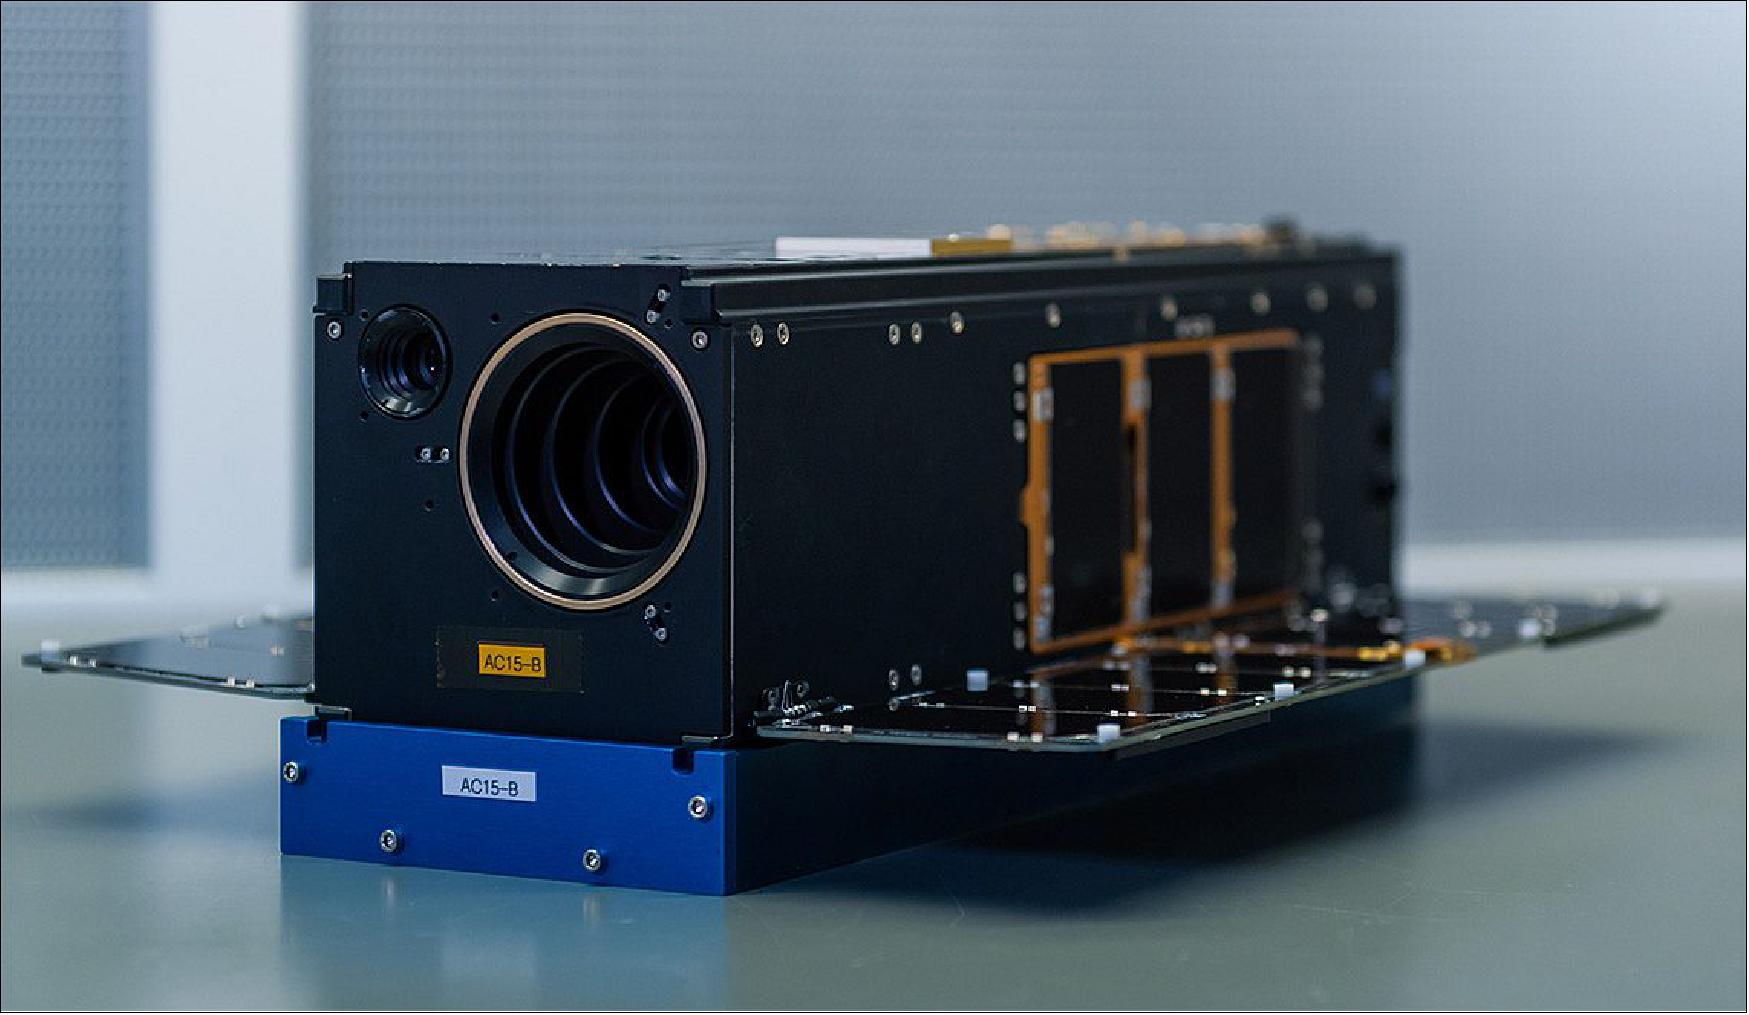 Figure 9: AeroCube-15 CubeSat in the lab prior to launch integration. Aerospace was an early pioneer in the development of small satellites and continues to conduct pathfinding research in the field as one of the world’s leading private constellation operators (image credit: The Aerospace Corporation)